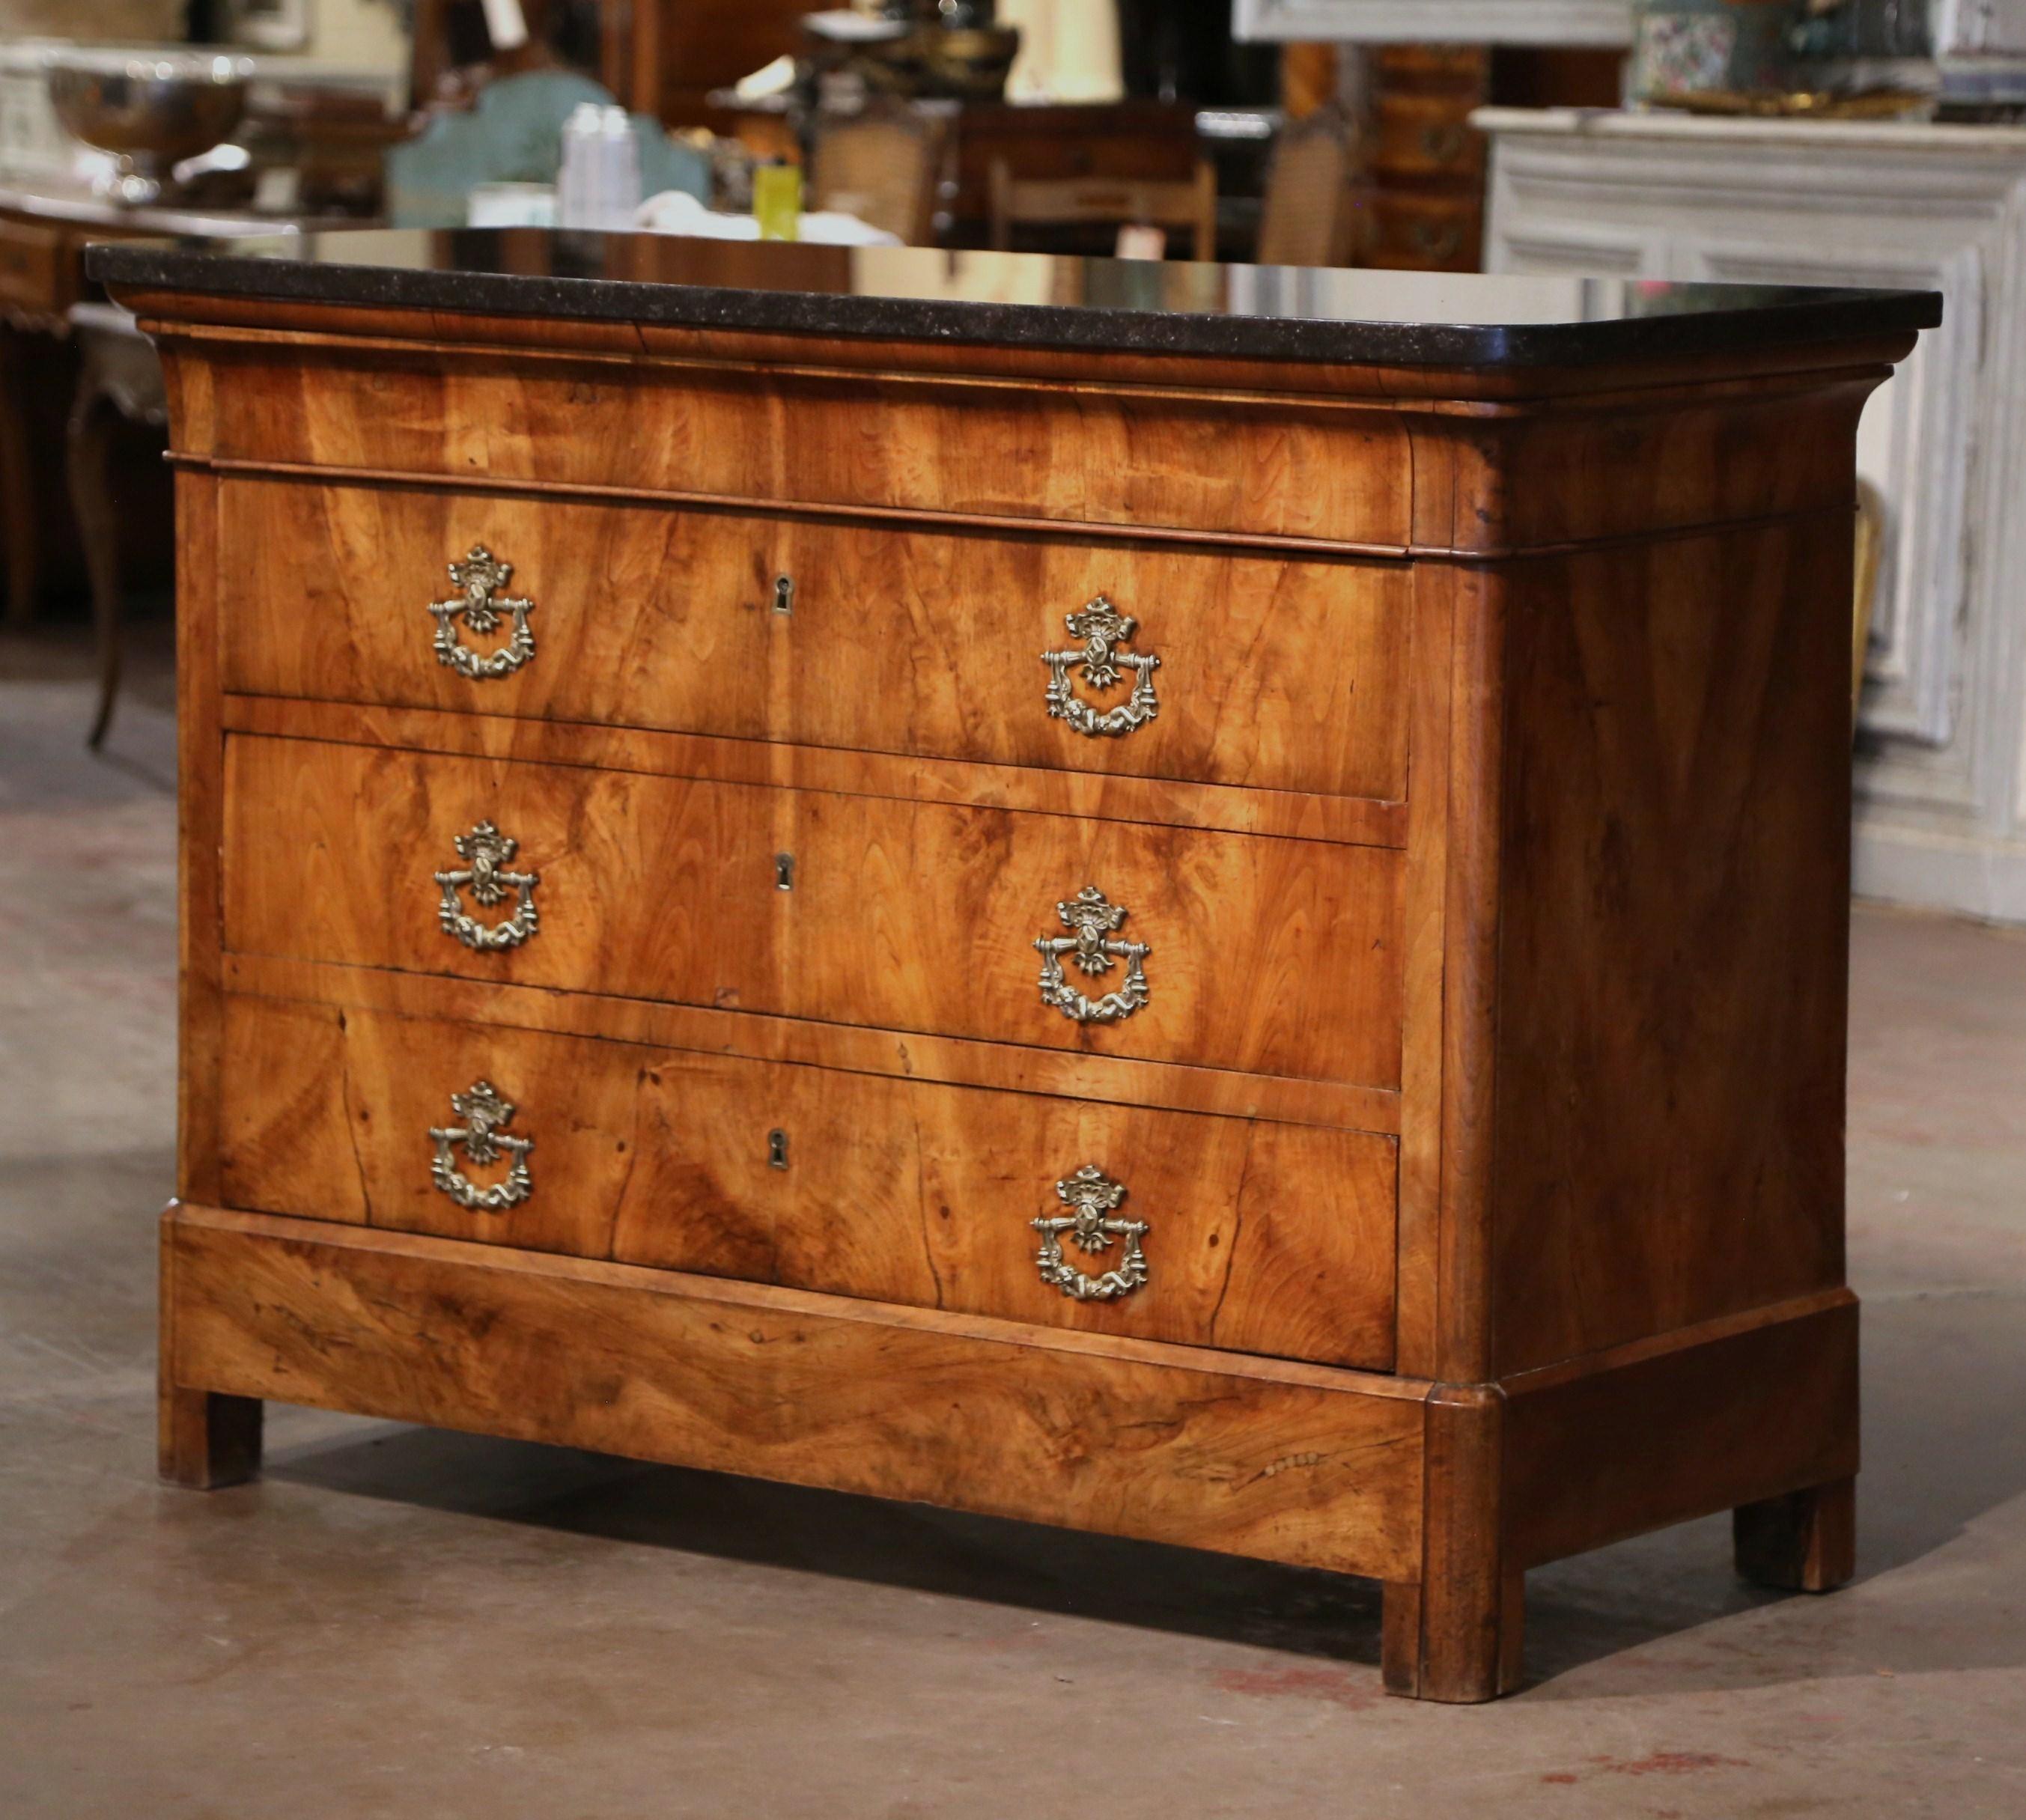 This elegant, antique chest of drawers was crafted in France, circa 1870. Built of walnut, the traditional commode with simple lines stands on shaped feet over a thick and raised base plinth; the cabinet features four long drawers across the front